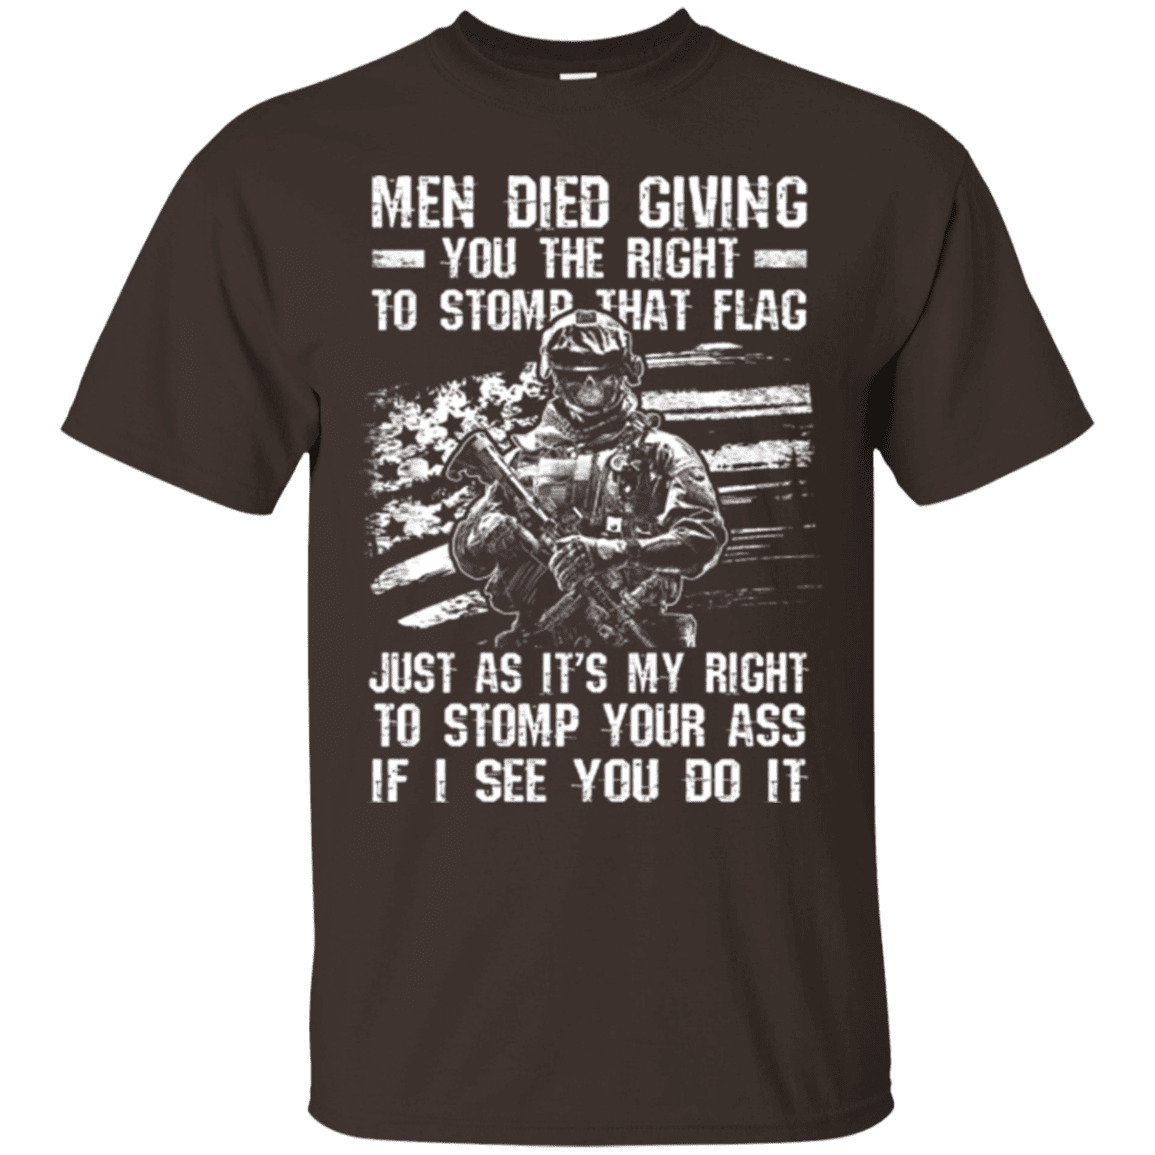 Military T-Shirt "Men Died Giving You The Right To Stomp That Flag"-TShirt-General-Veterans Nation